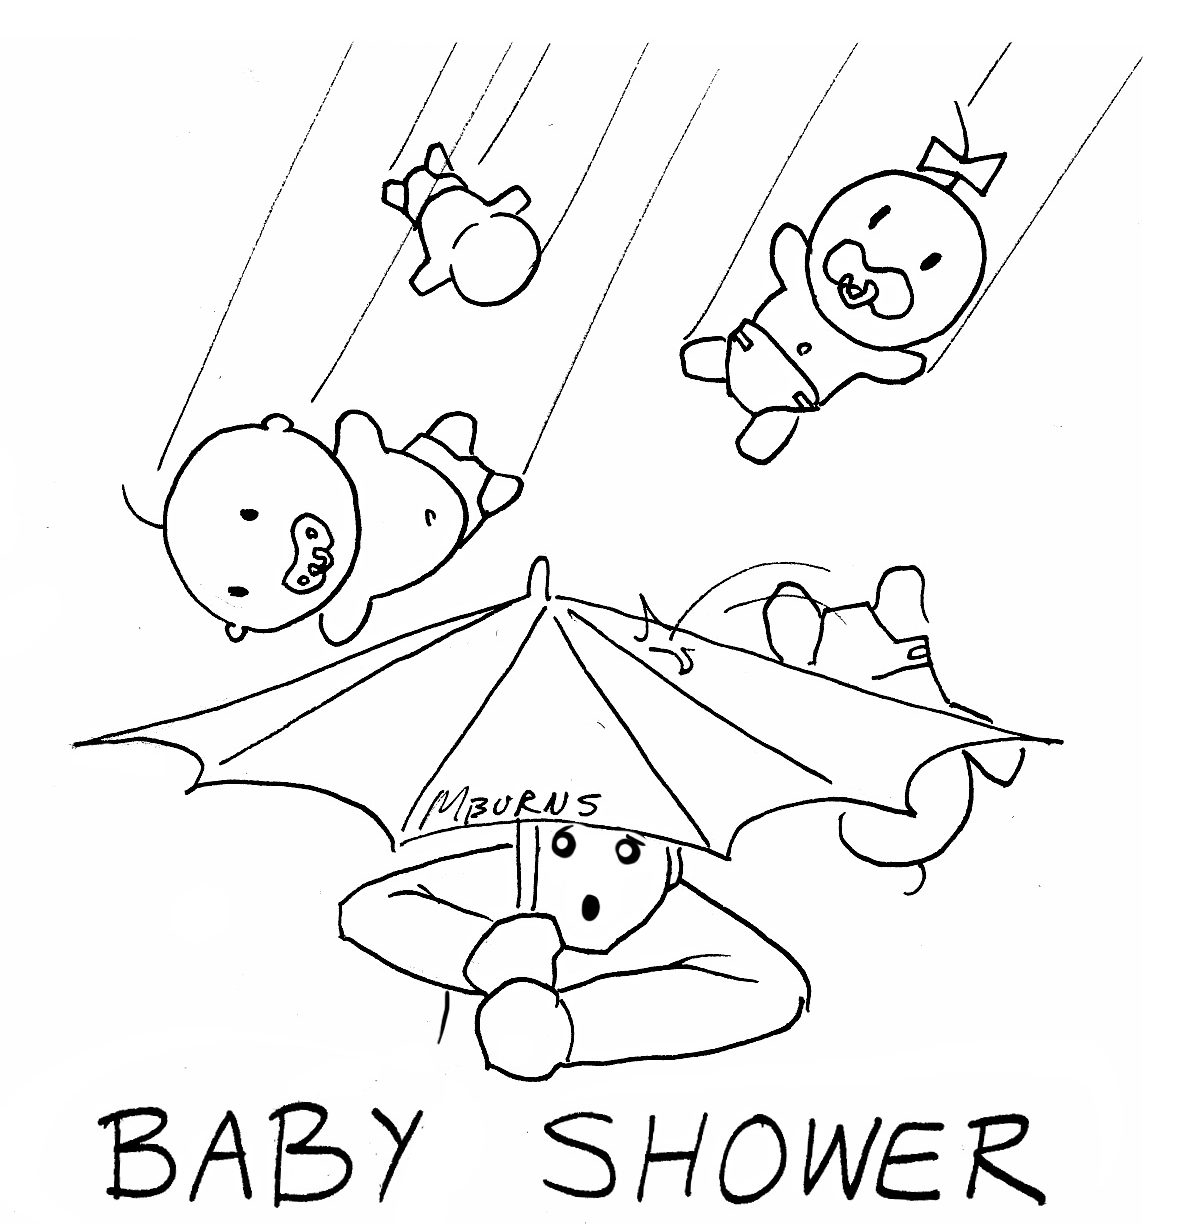 Baby Shower Coloring Pages - Free Printable Baby Shower Coloring Pages